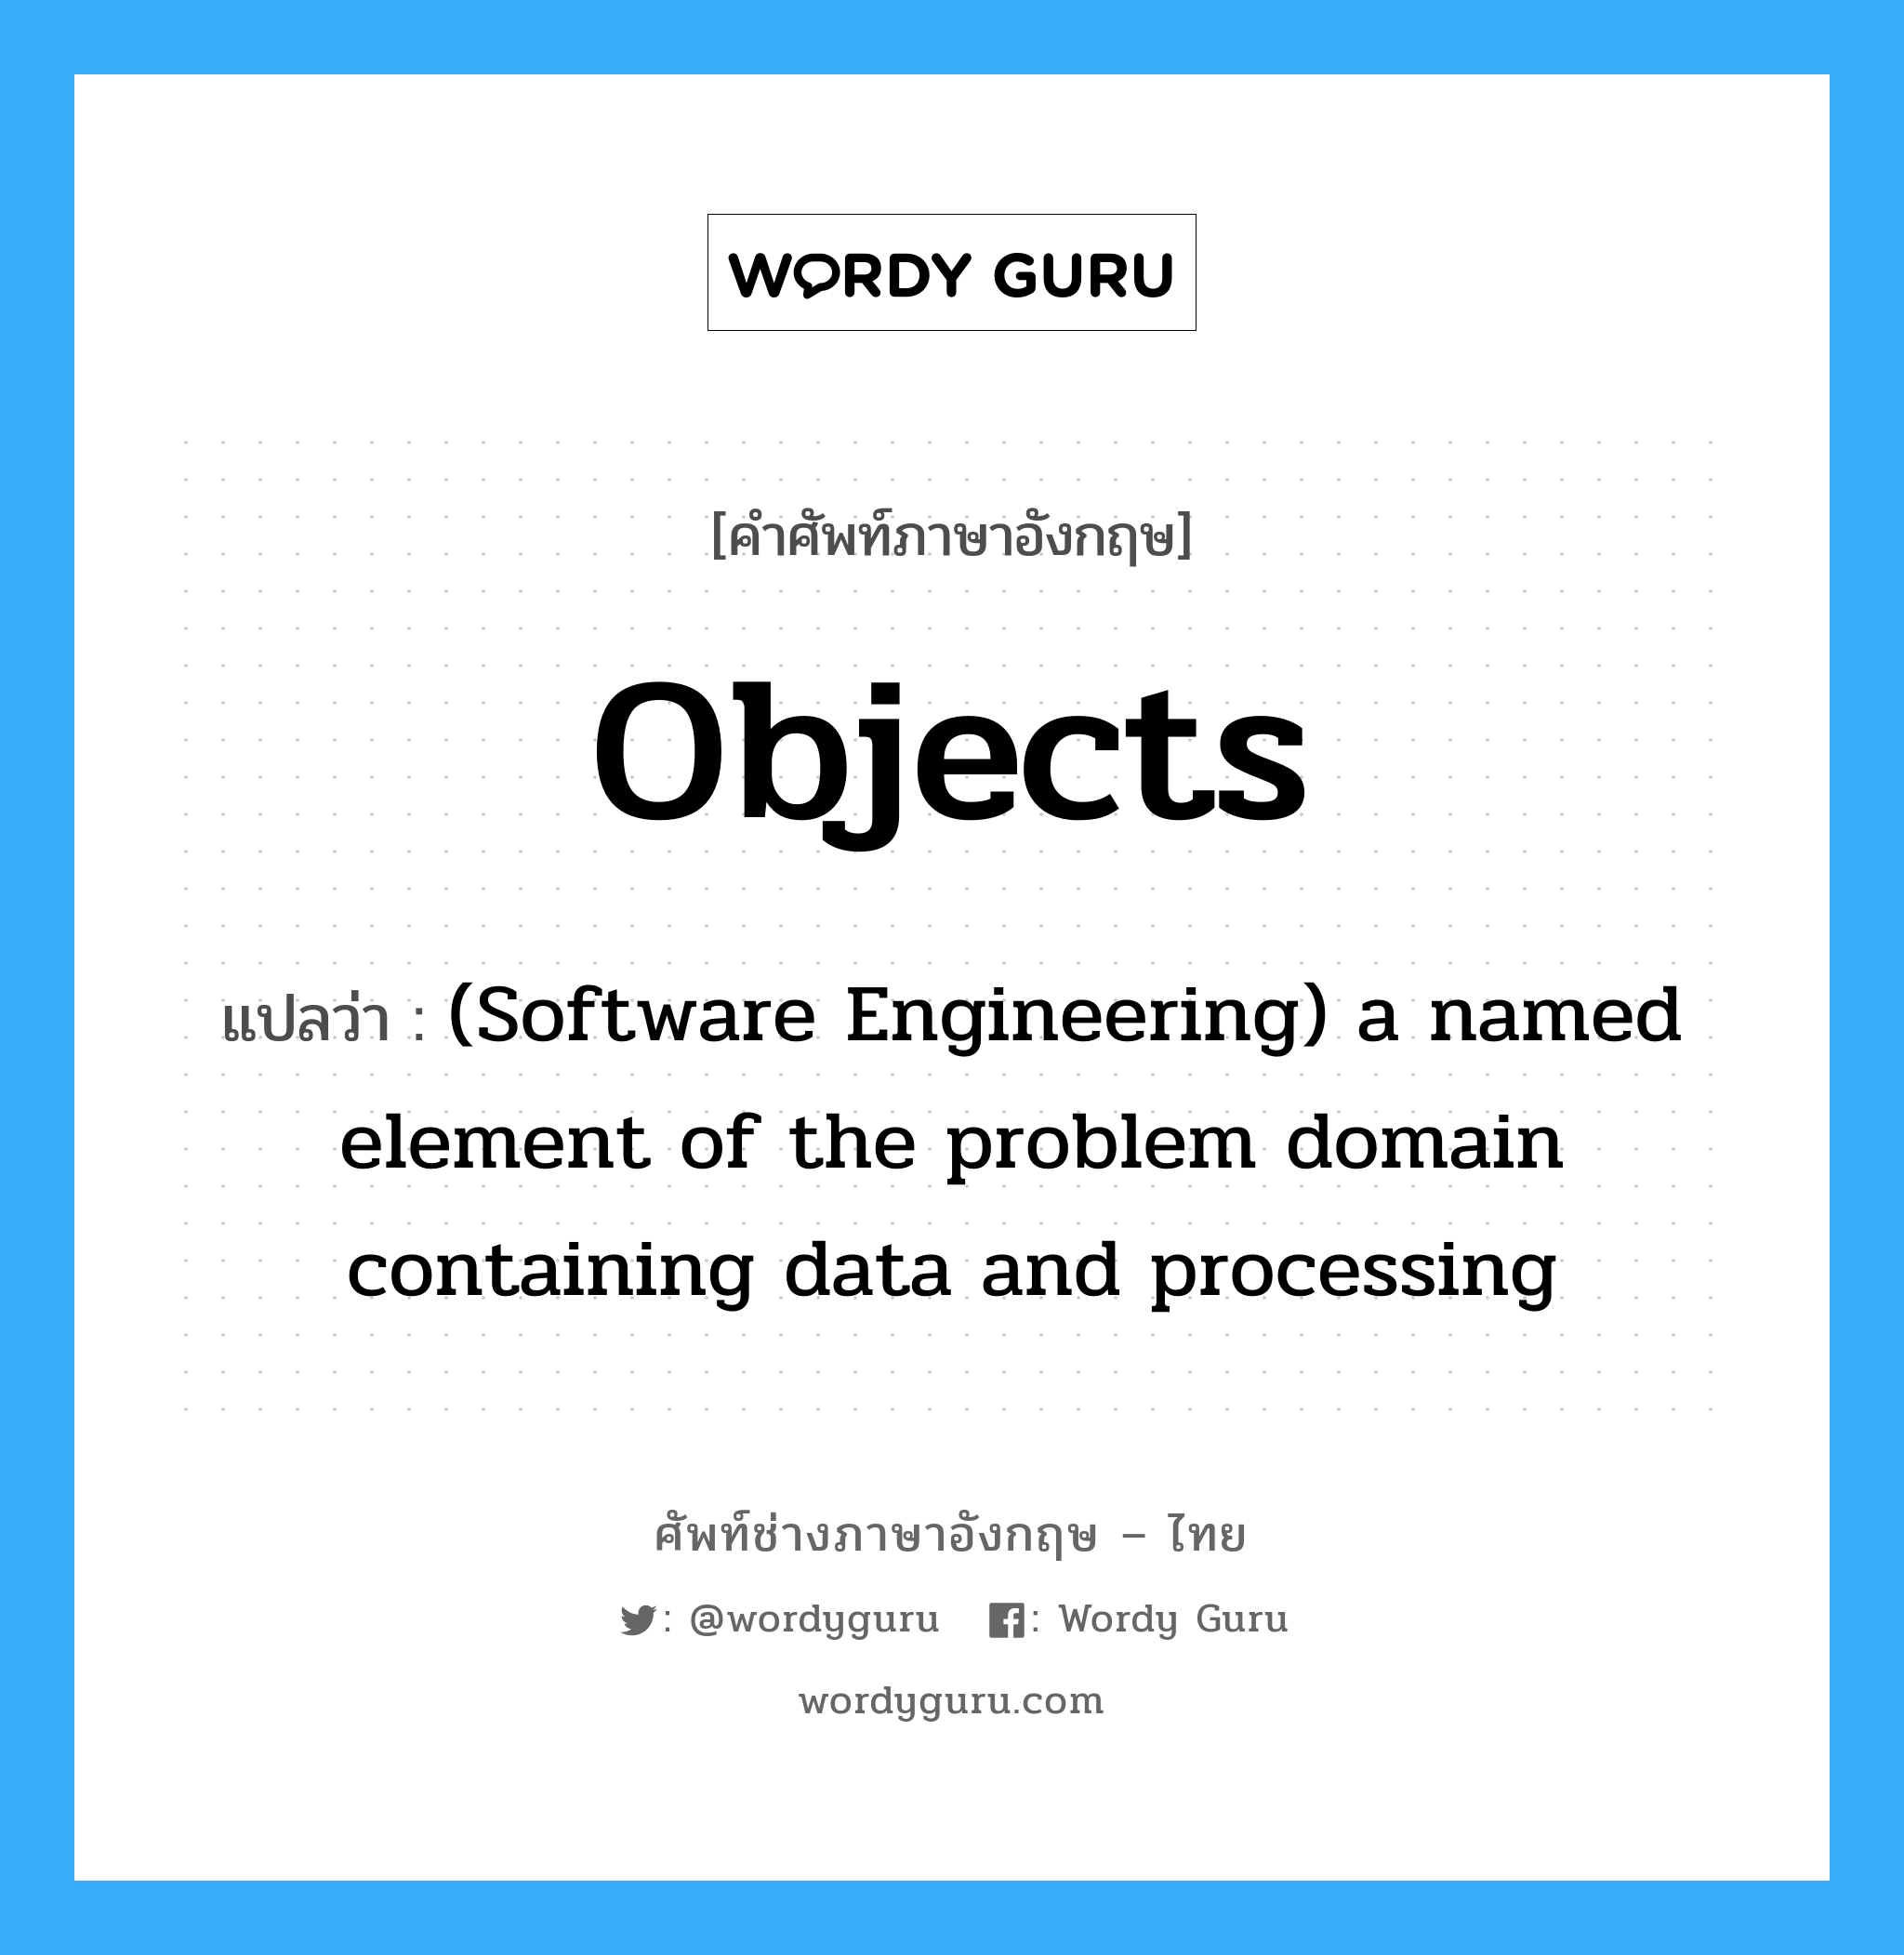 (Software Engineering) a named element of the problem domain containing data and processing ภาษาอังกฤษ?, คำศัพท์ช่างภาษาอังกฤษ - ไทย (Software Engineering) a named element of the problem domain containing data and processing คำศัพท์ภาษาอังกฤษ (Software Engineering) a named element of the problem domain containing data and processing แปลว่า Objects